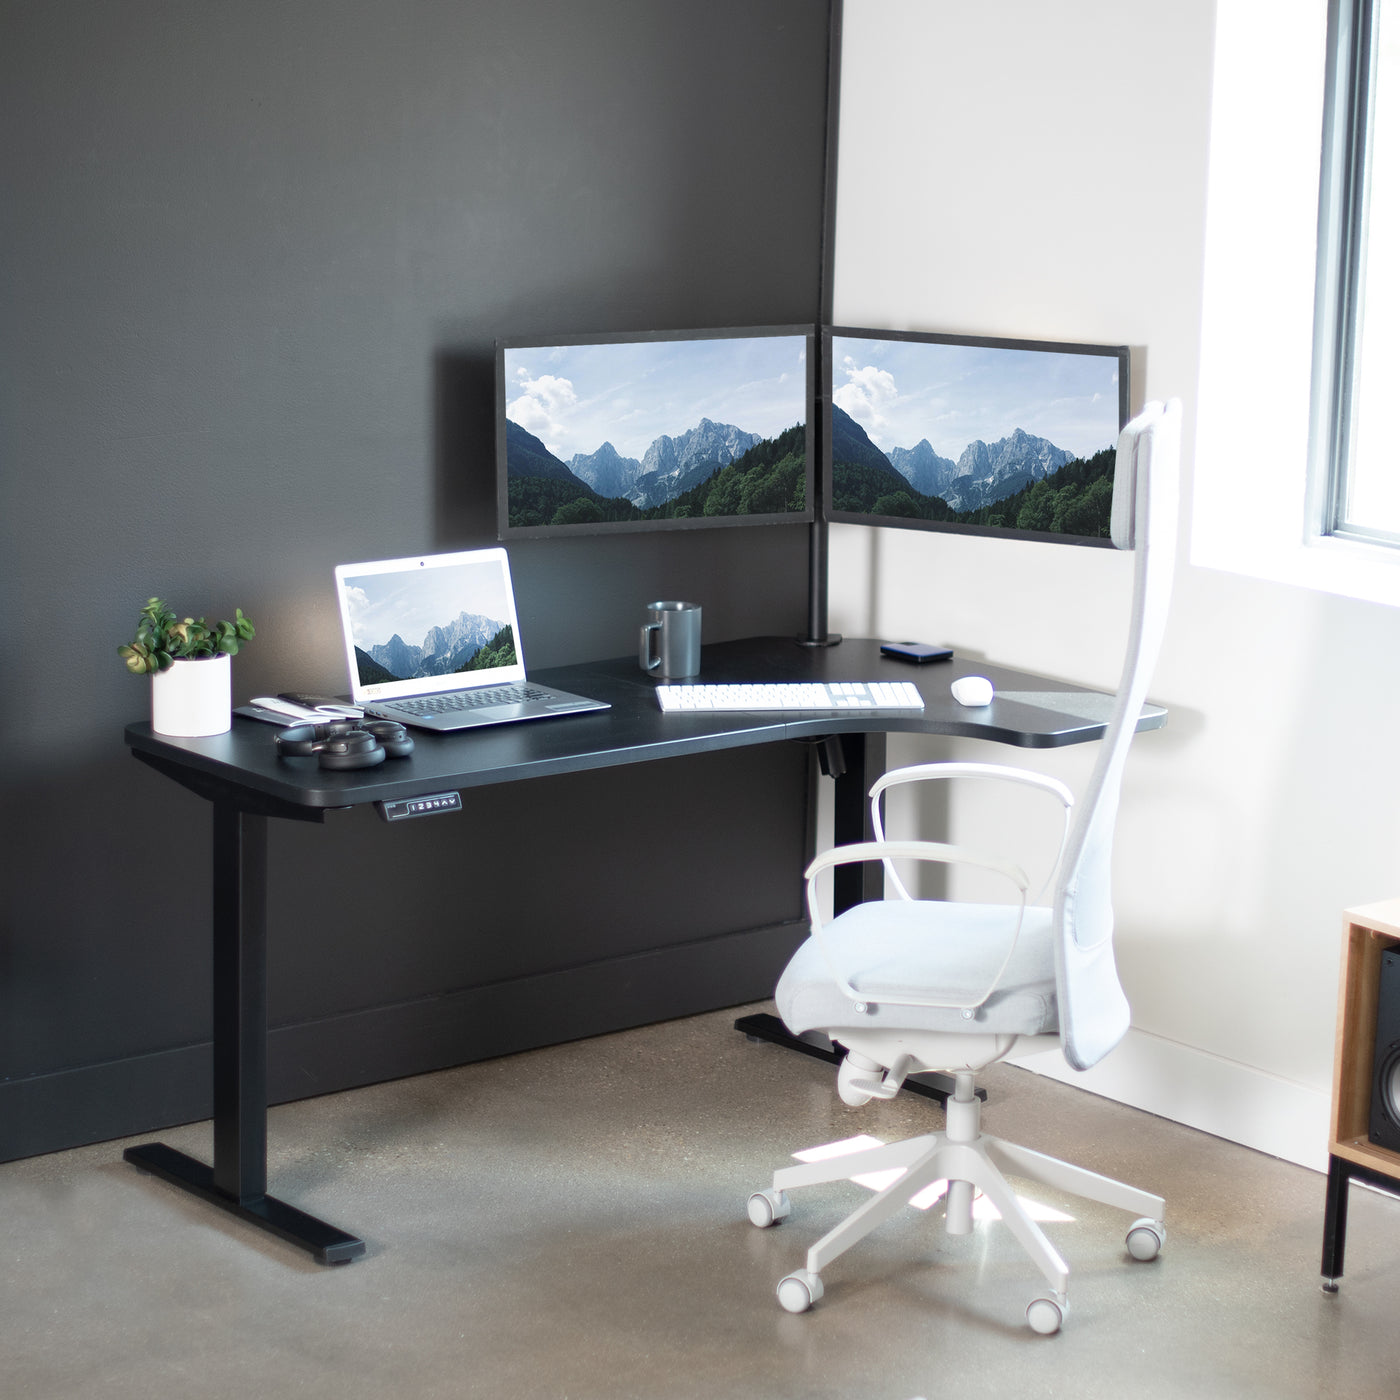 Wide and smooth height range of ergonomic electric sit-to-stand desk.